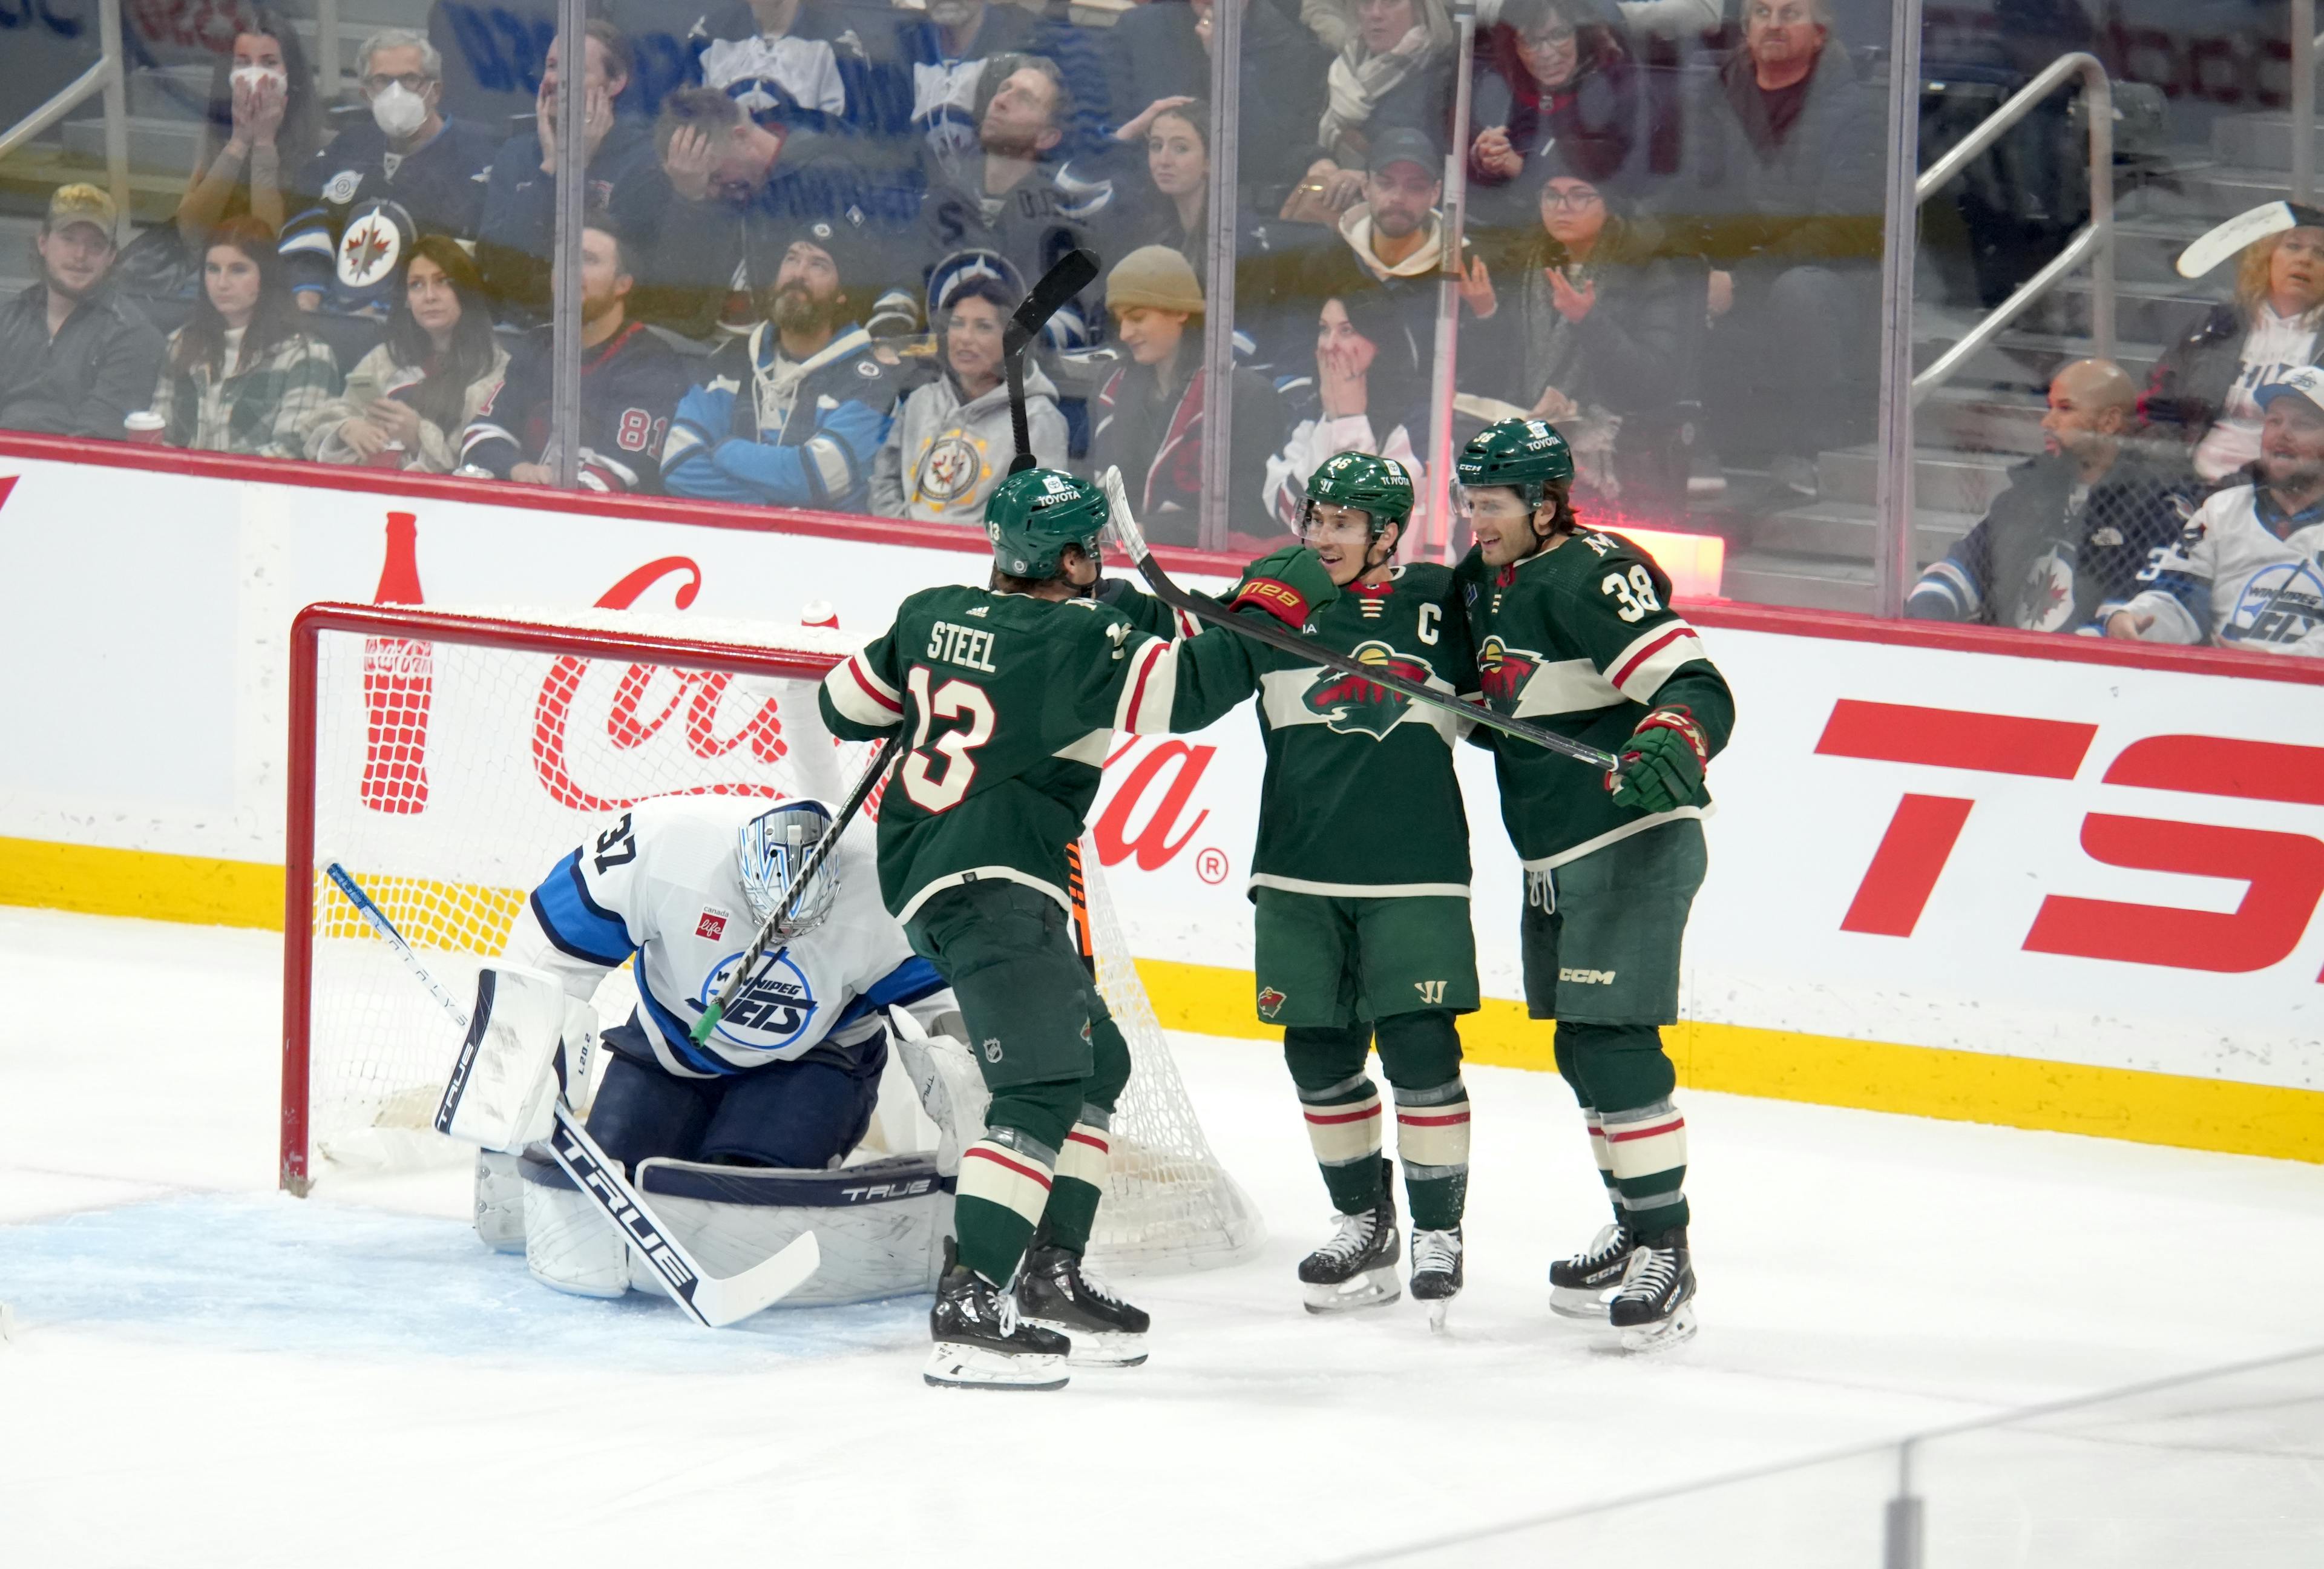 Jets Drop Third-Straight, Fall 4-1 to Wild in First Game Post-Christmas